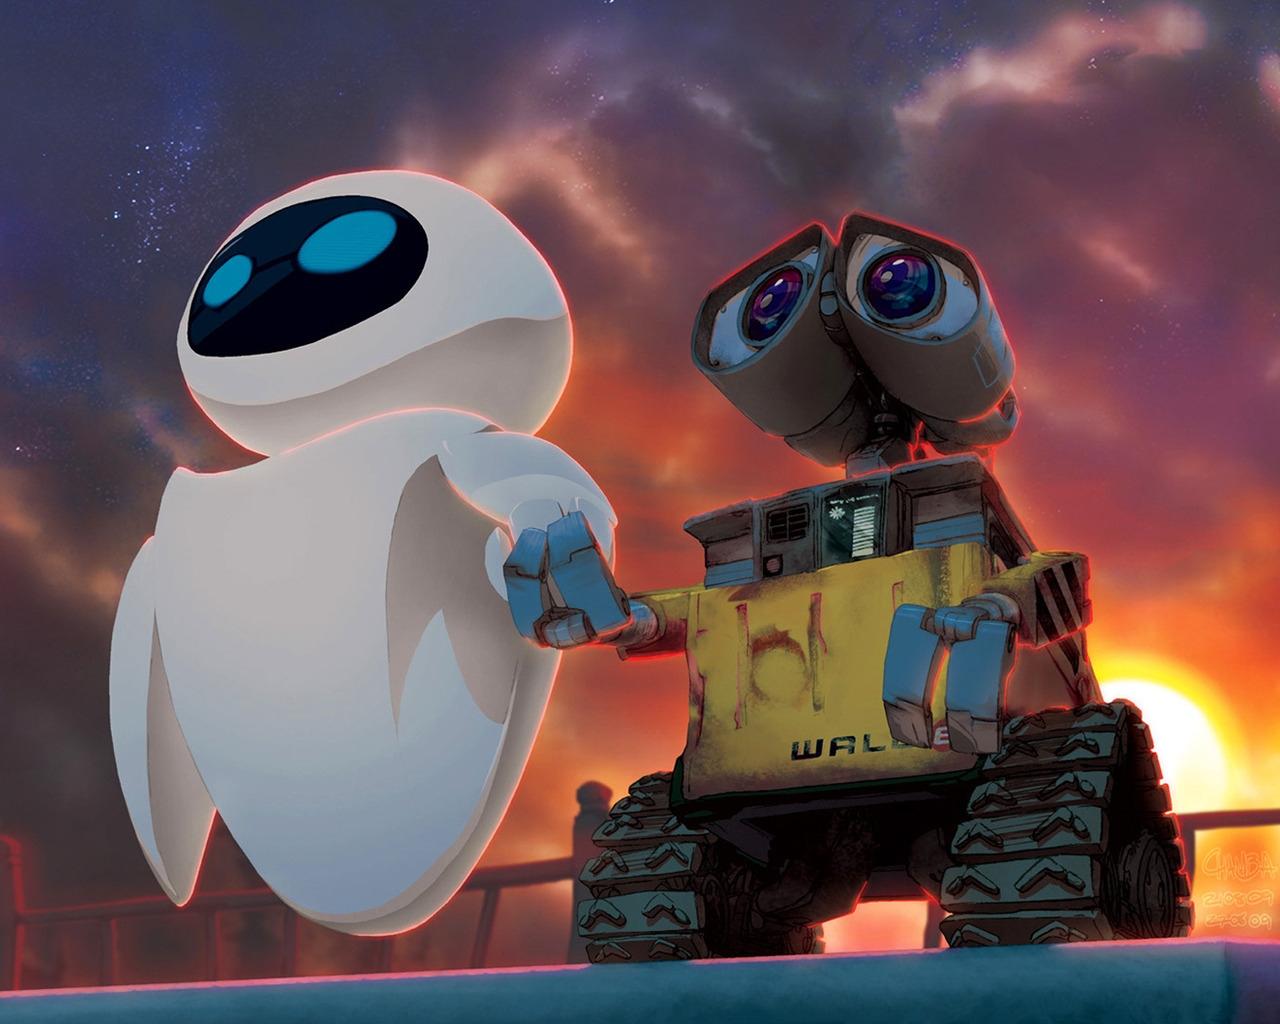 Walle Cartooned for 1280 x 1024 resolution